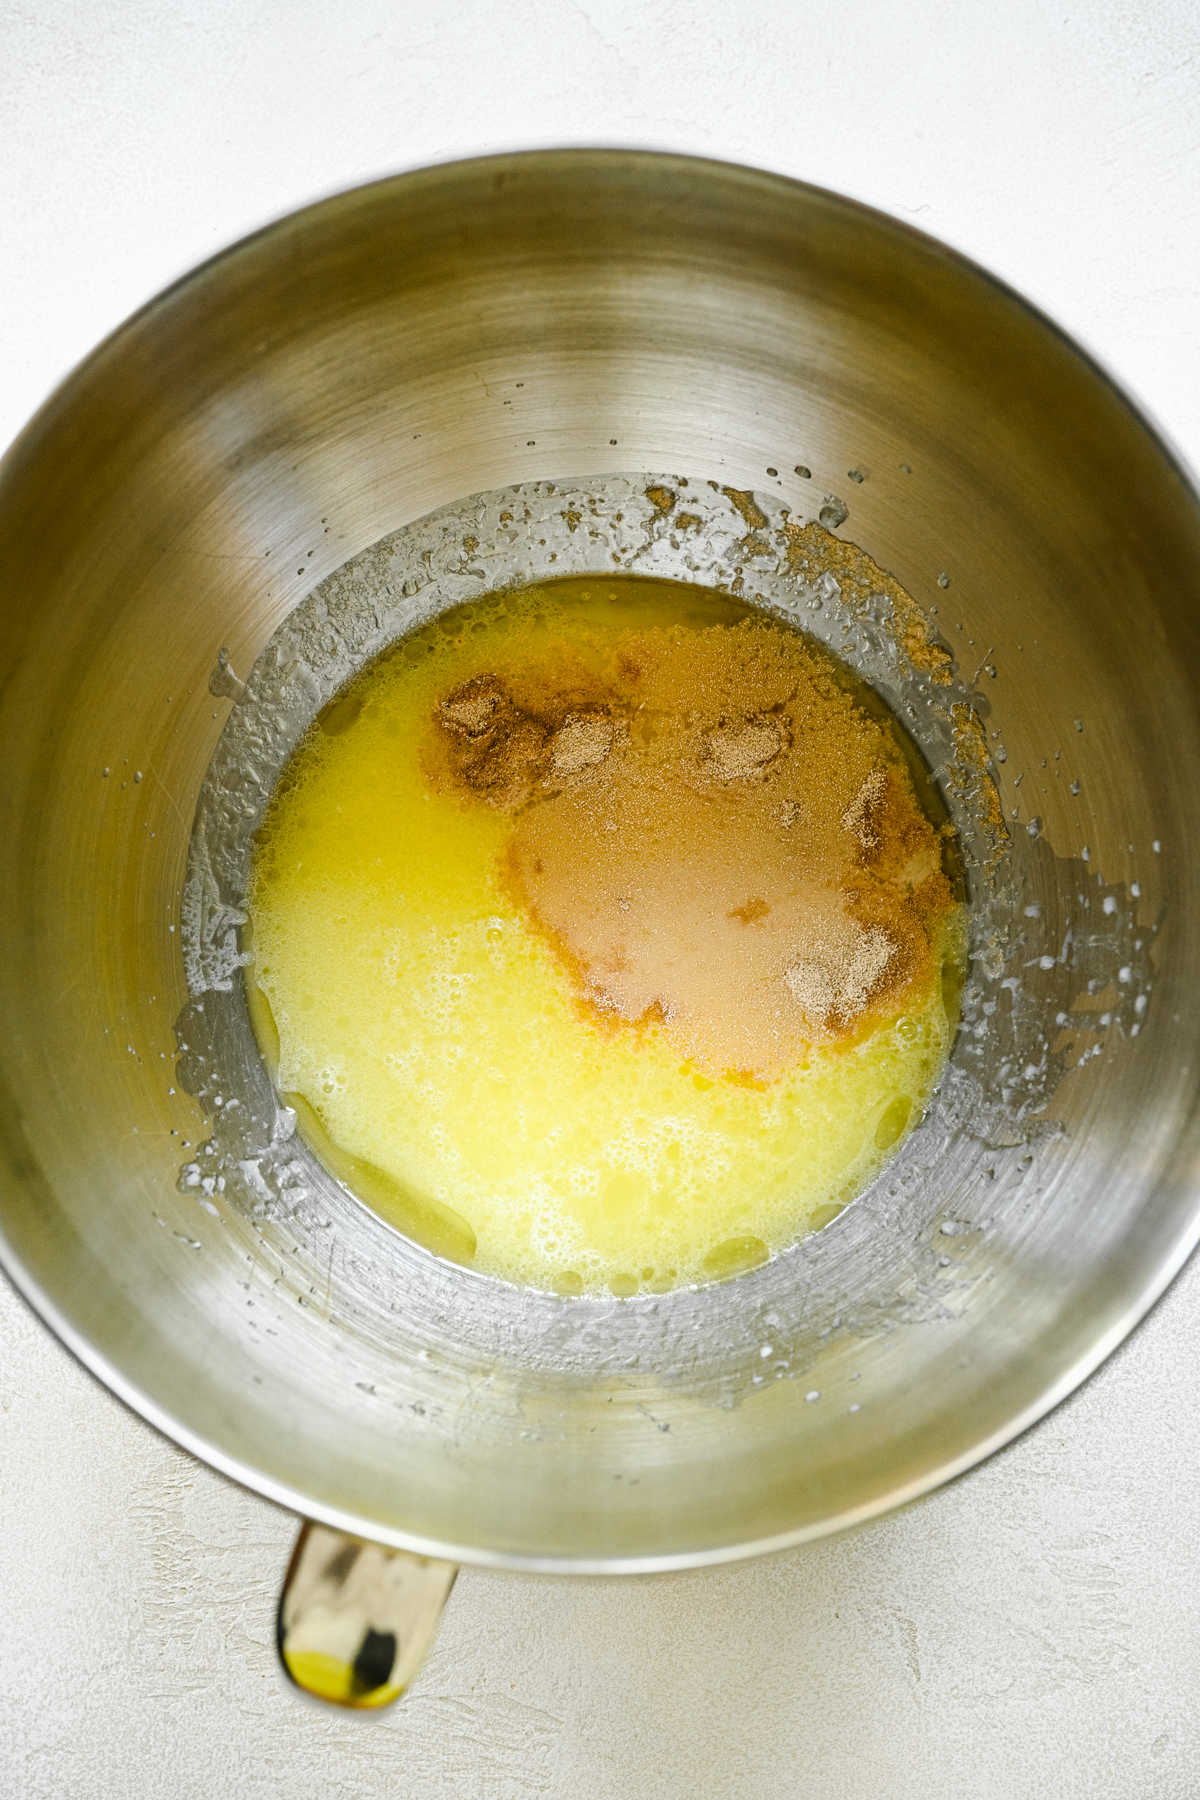 Melted butter mixture and yeast mixture in a silver mixing bowl. 